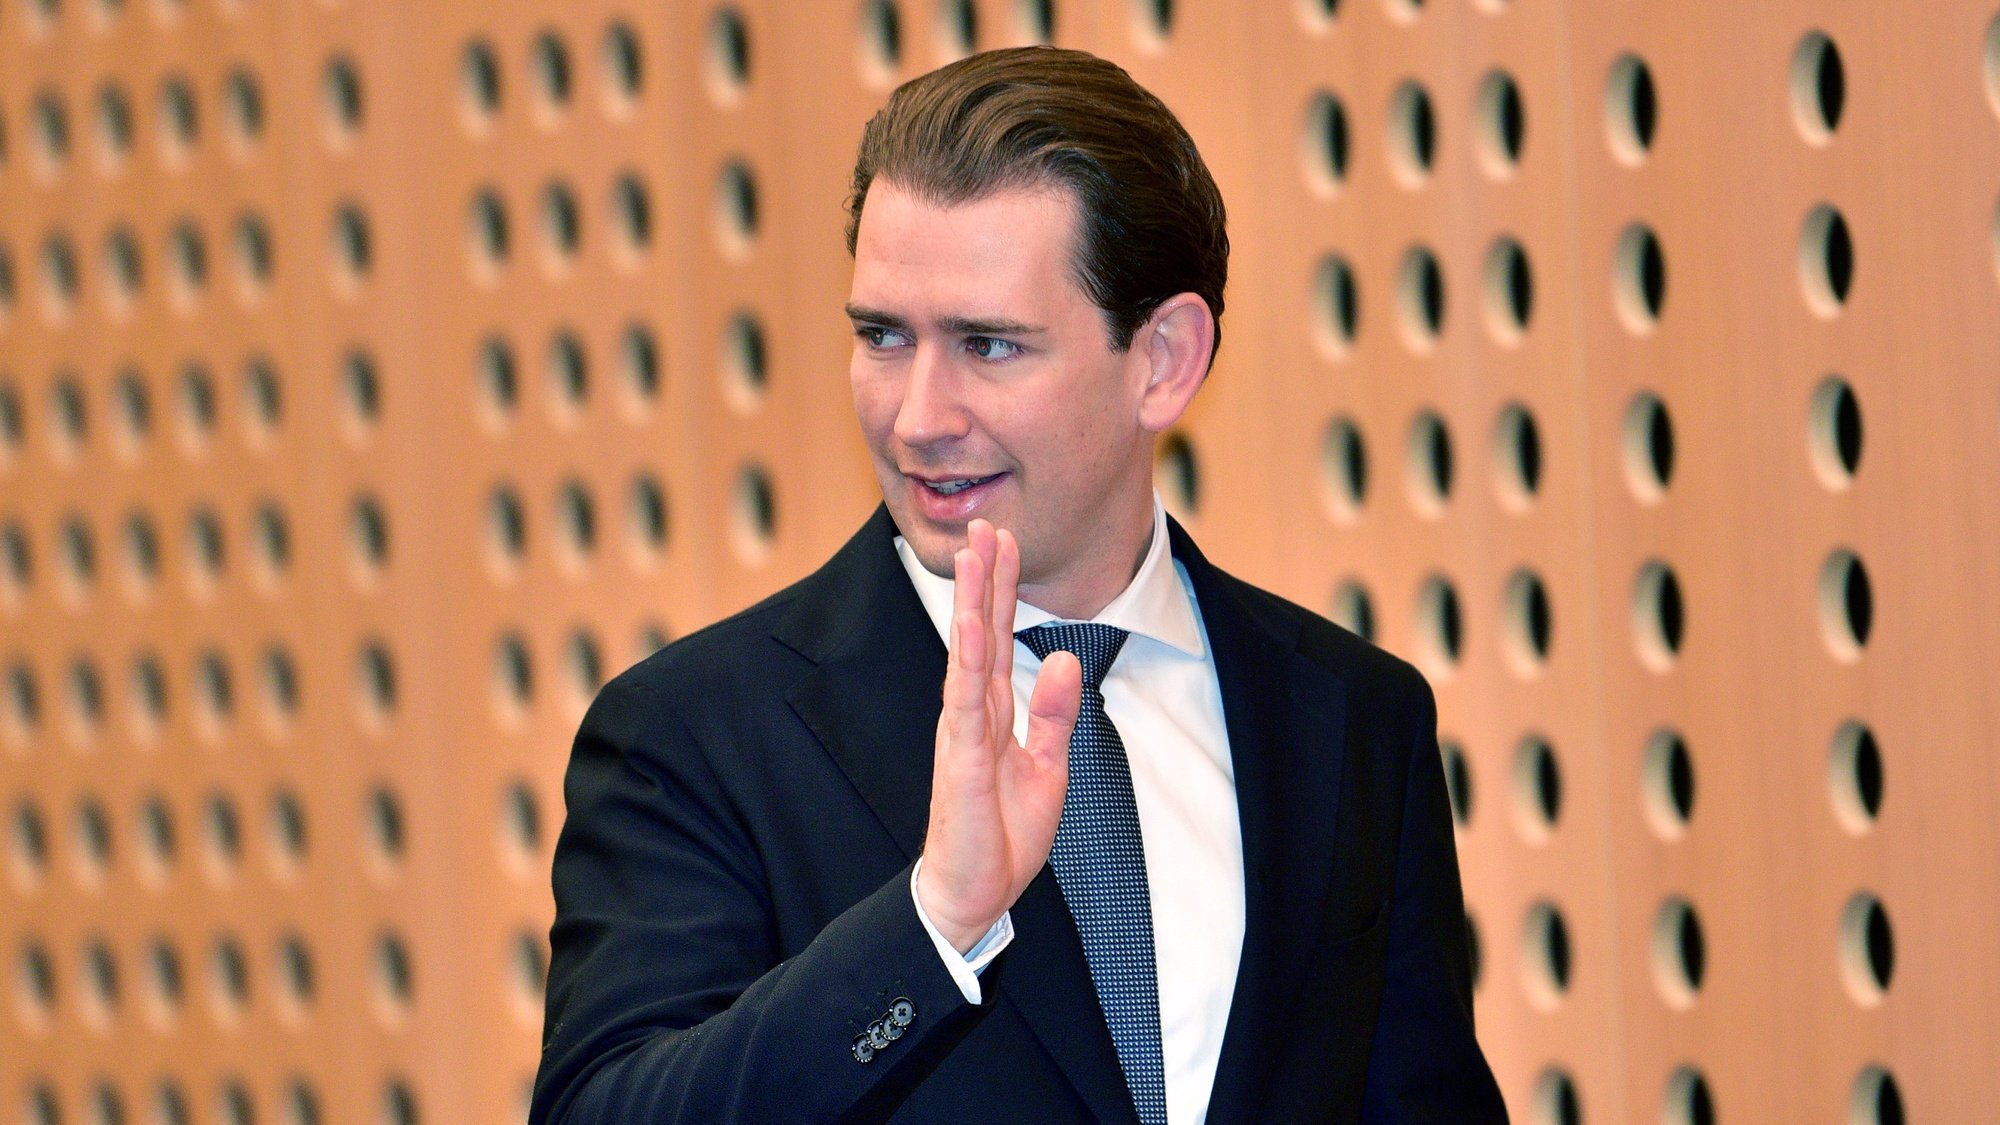 epa09508616 Austrian Chancellor Sebastian Kurz waves during a plenary session of the EU-Western Balkans summit in Brdo pri Kranju, in Kranj, Slovenia, 06 October 2021. The summit, part of the EU&#039;s strategic engagement with the Western Balkans, is hosted by the Slovenian presidency of the Council and brings together leaders from EU member states and the six Western Balkans partners (Albania, Bosnia and Herzegovina, Serbia, Montenegro, North Macedonia and Kosovo).  EPA/IGOR KUPLJENIK